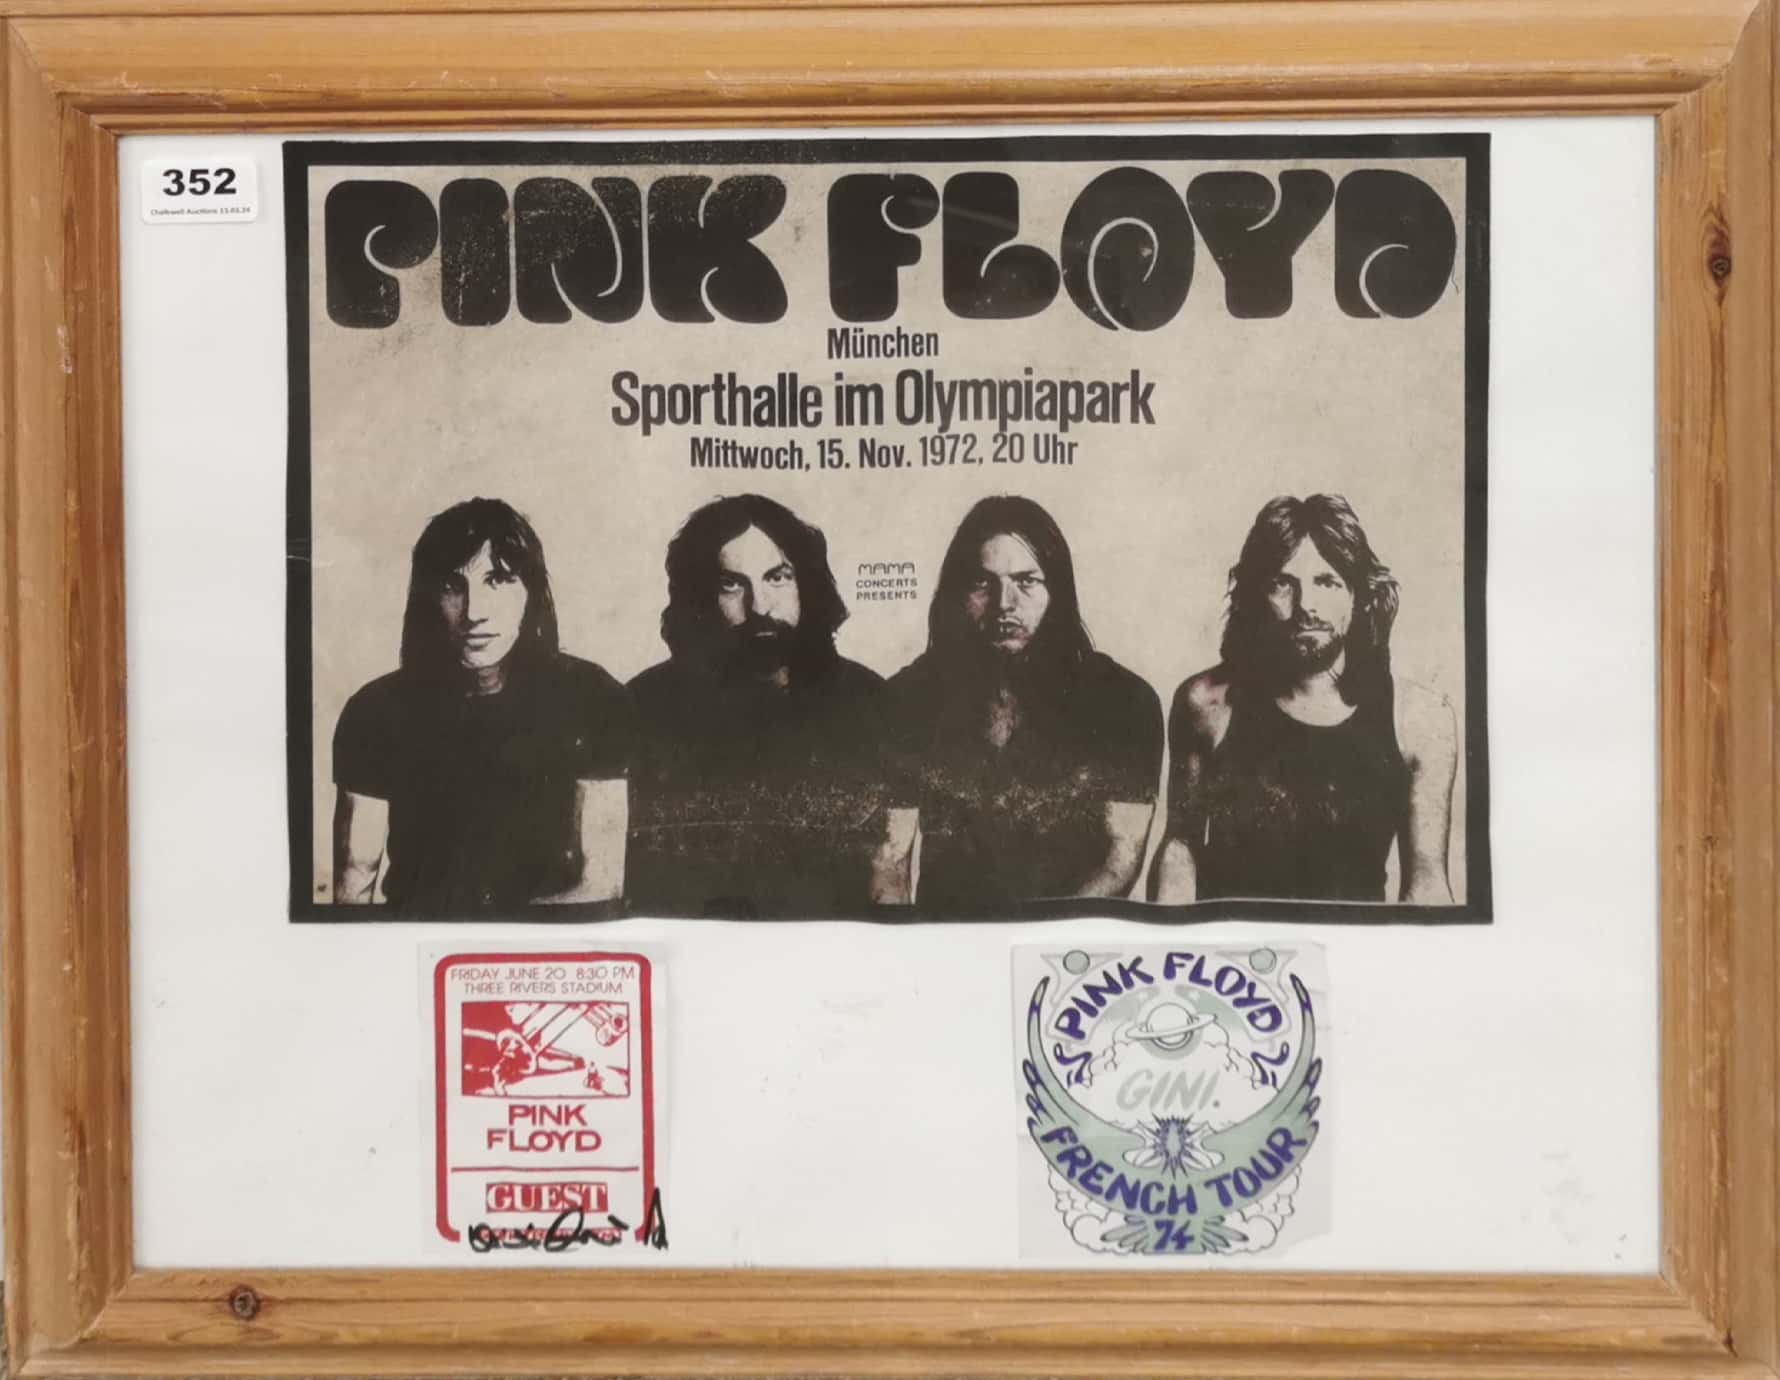 A framed poster from 'Pink Floyd' concert at the Sports Hall Olympic Park, Munich 1972 along with